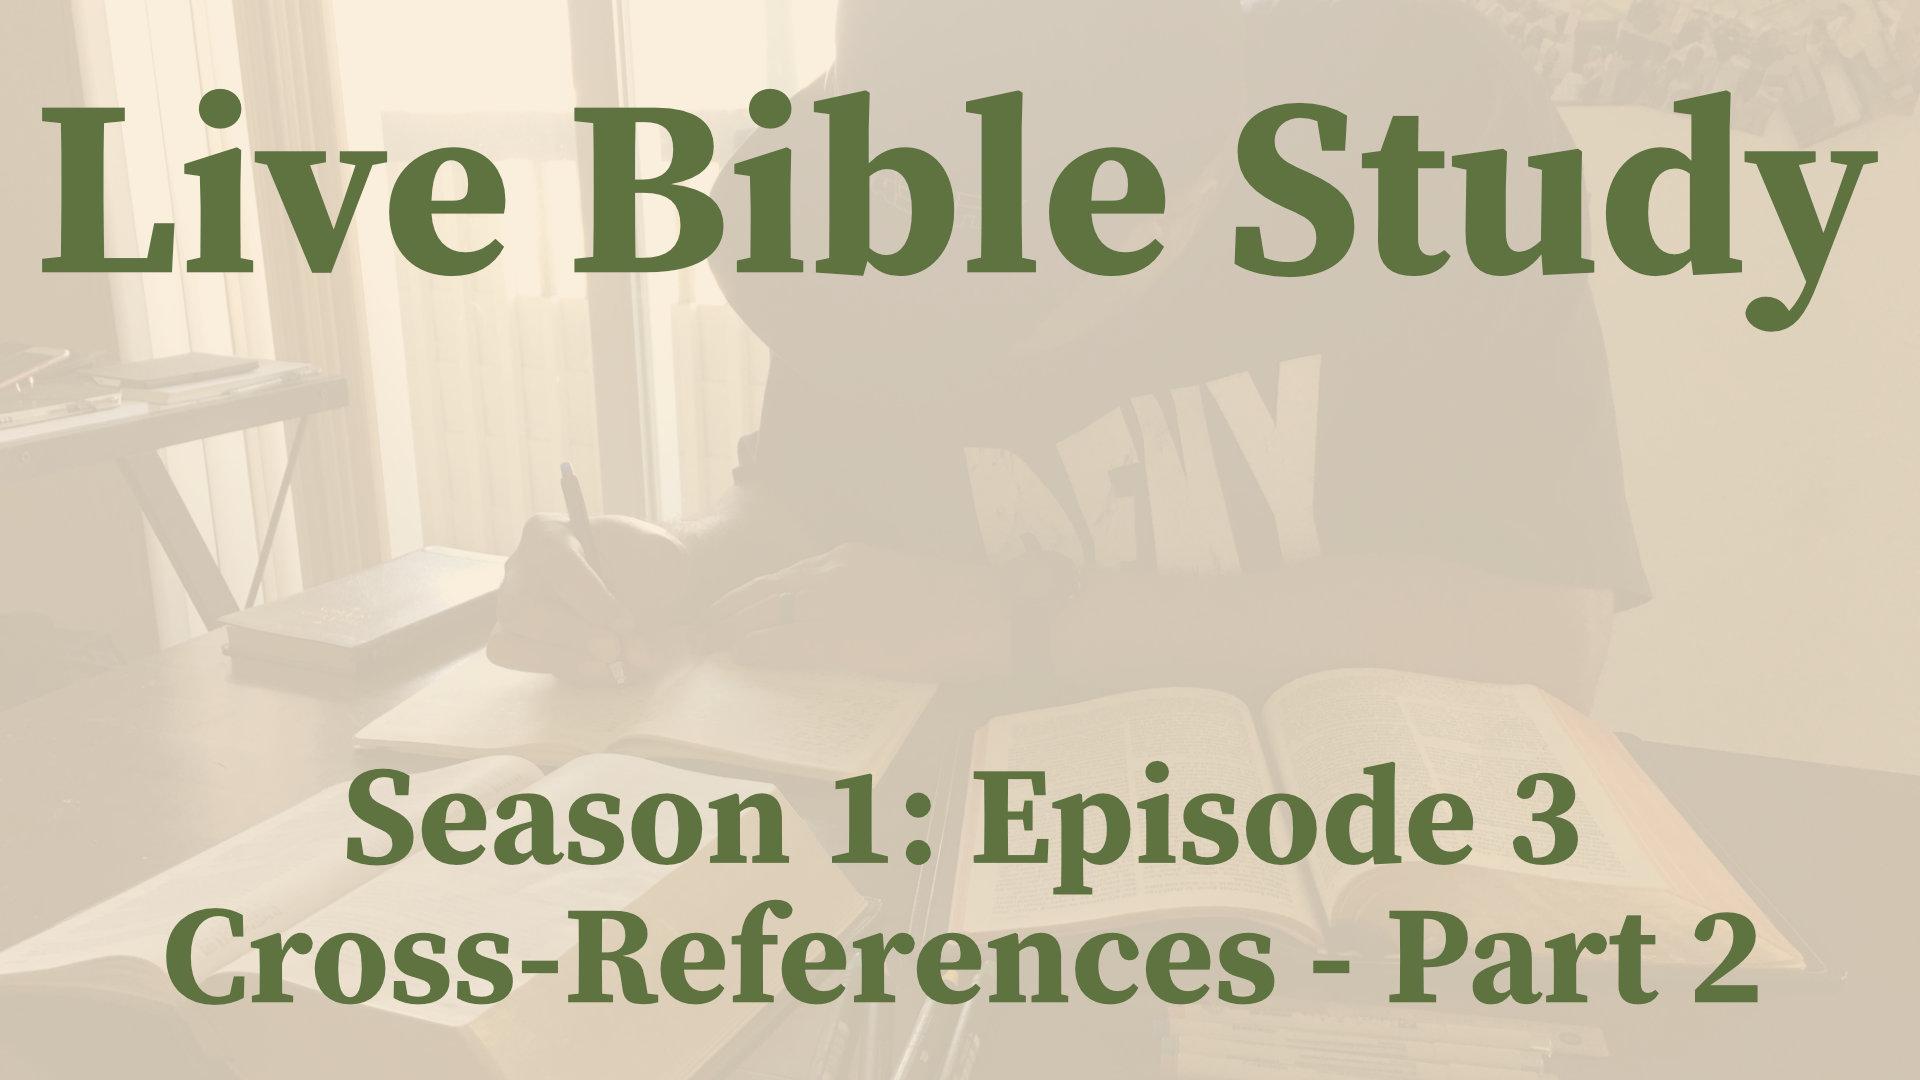 Cross-References – Part 2 (S1: Episode 3)